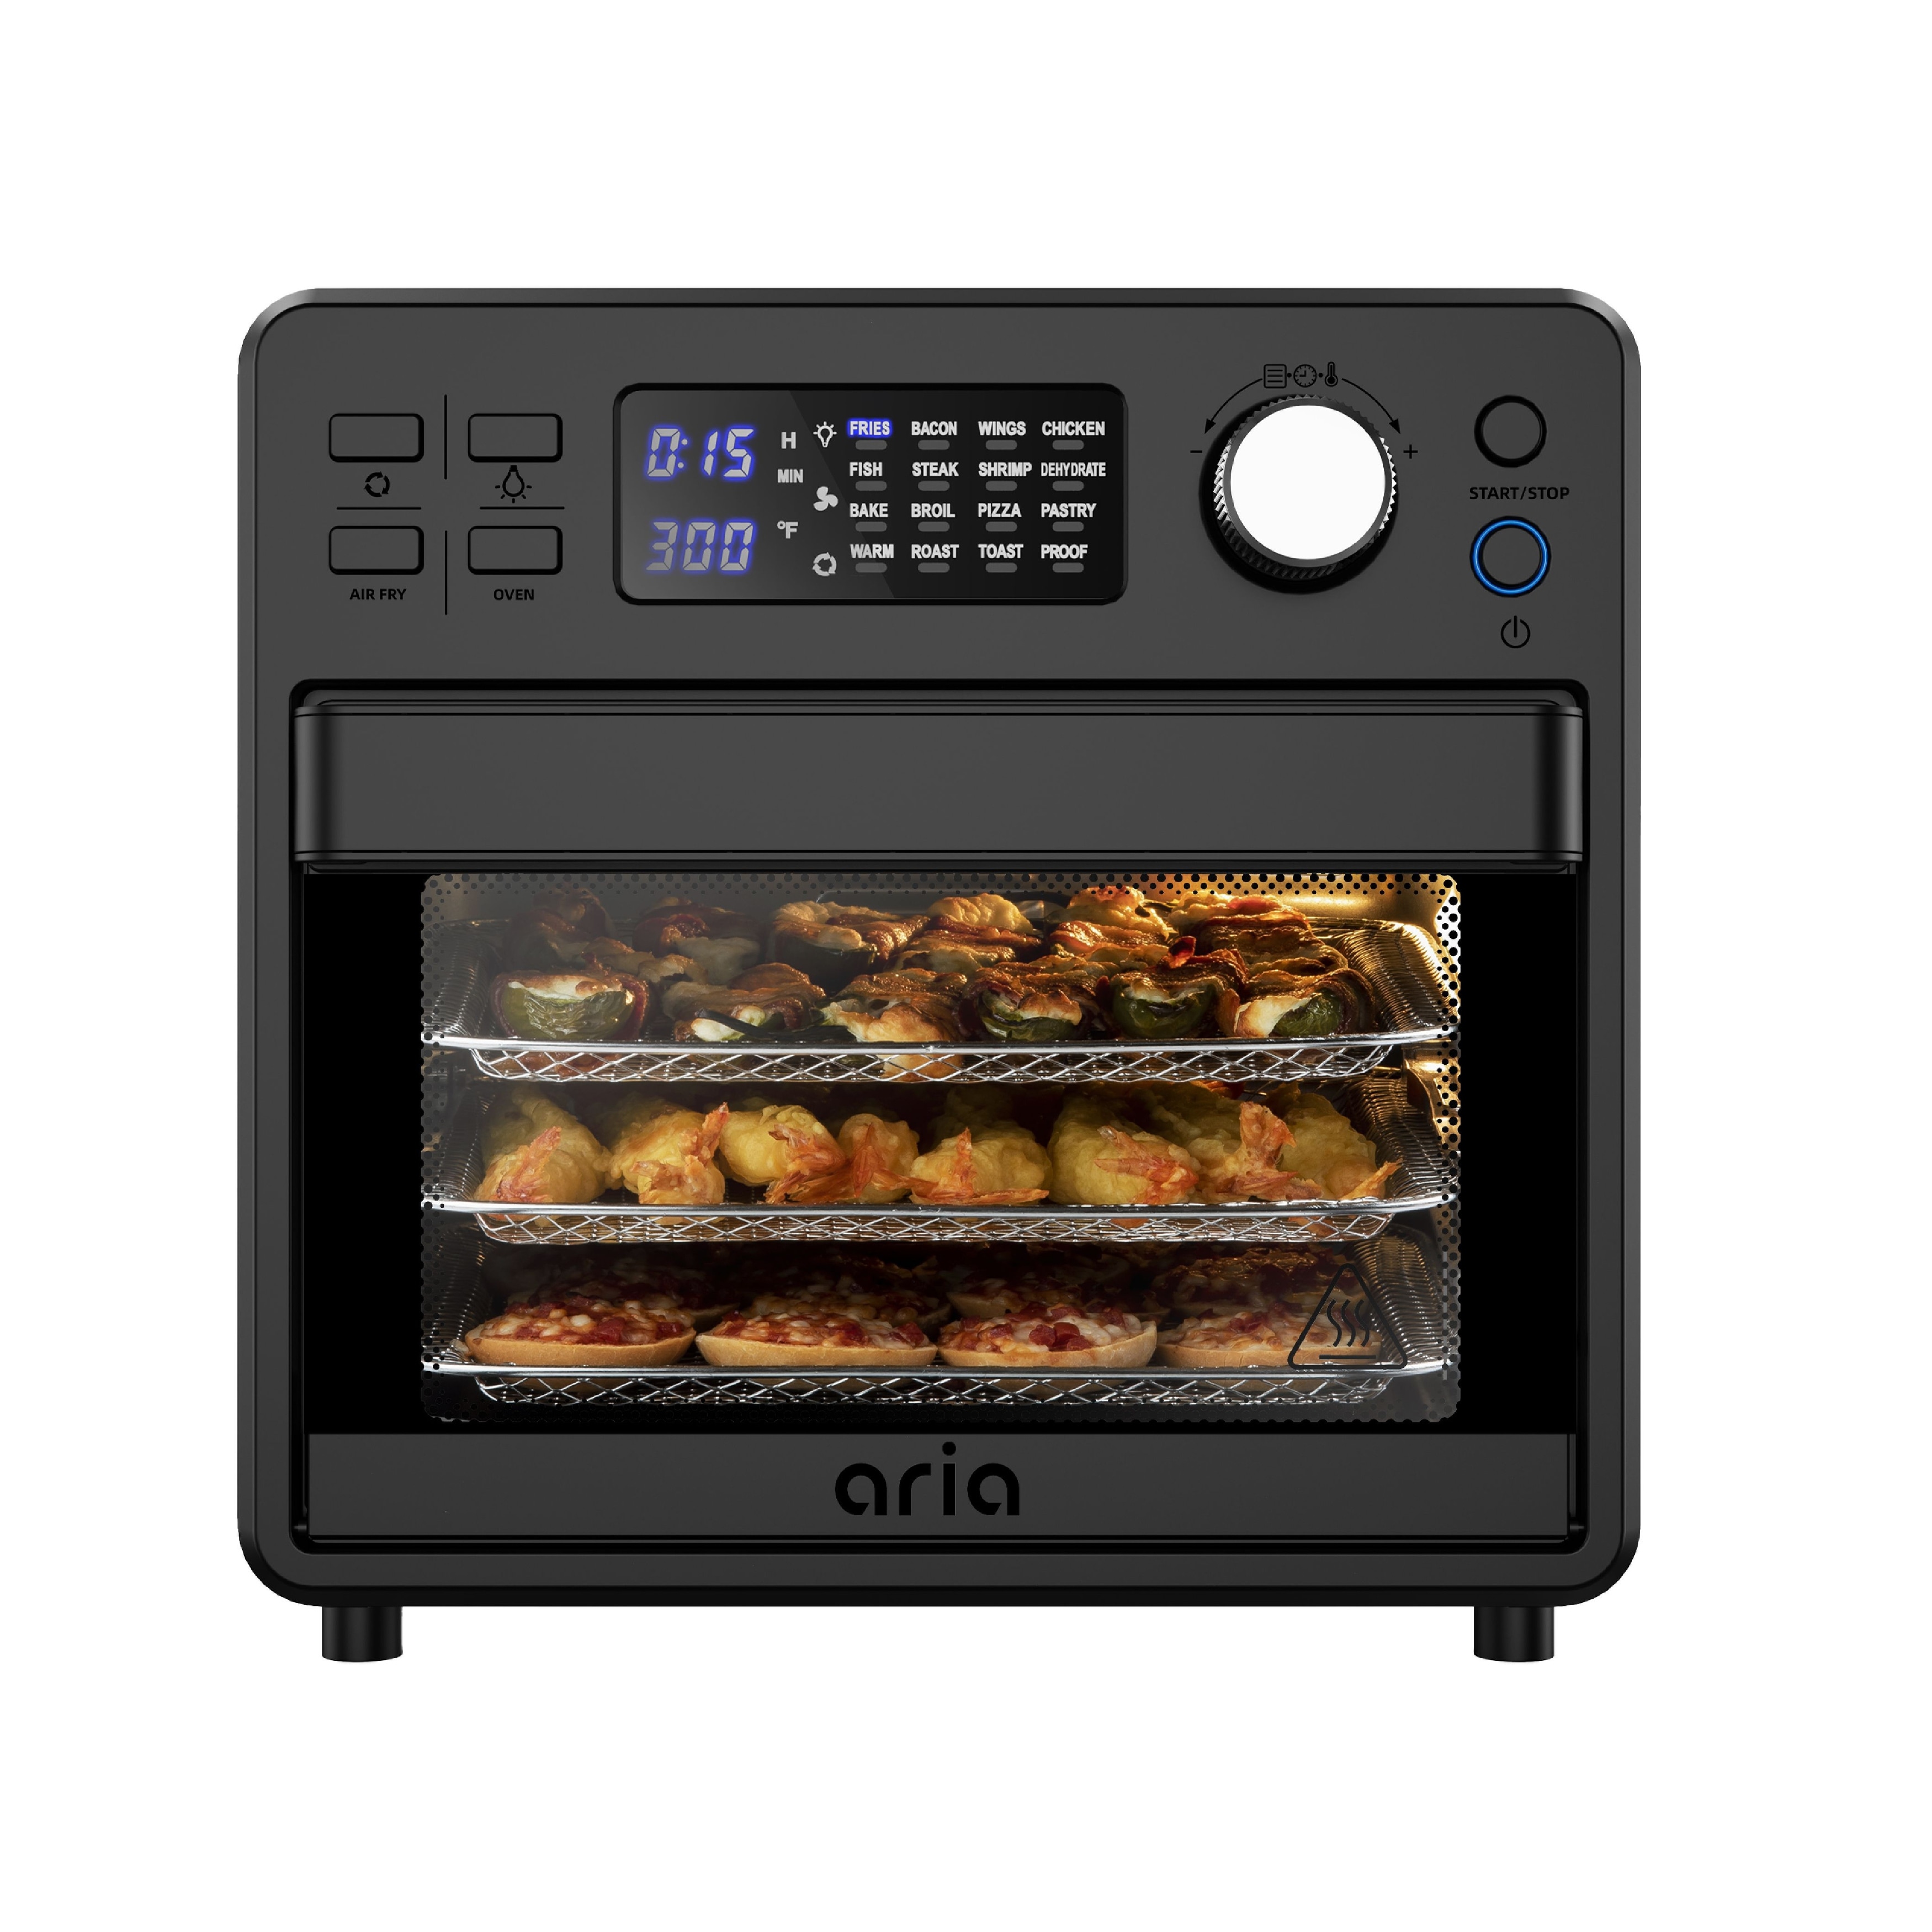 Oster Air Fryer Countertop Toaster Oven, French Door And Digital  Controls,Stainless Steel, Extra Large, 42 L